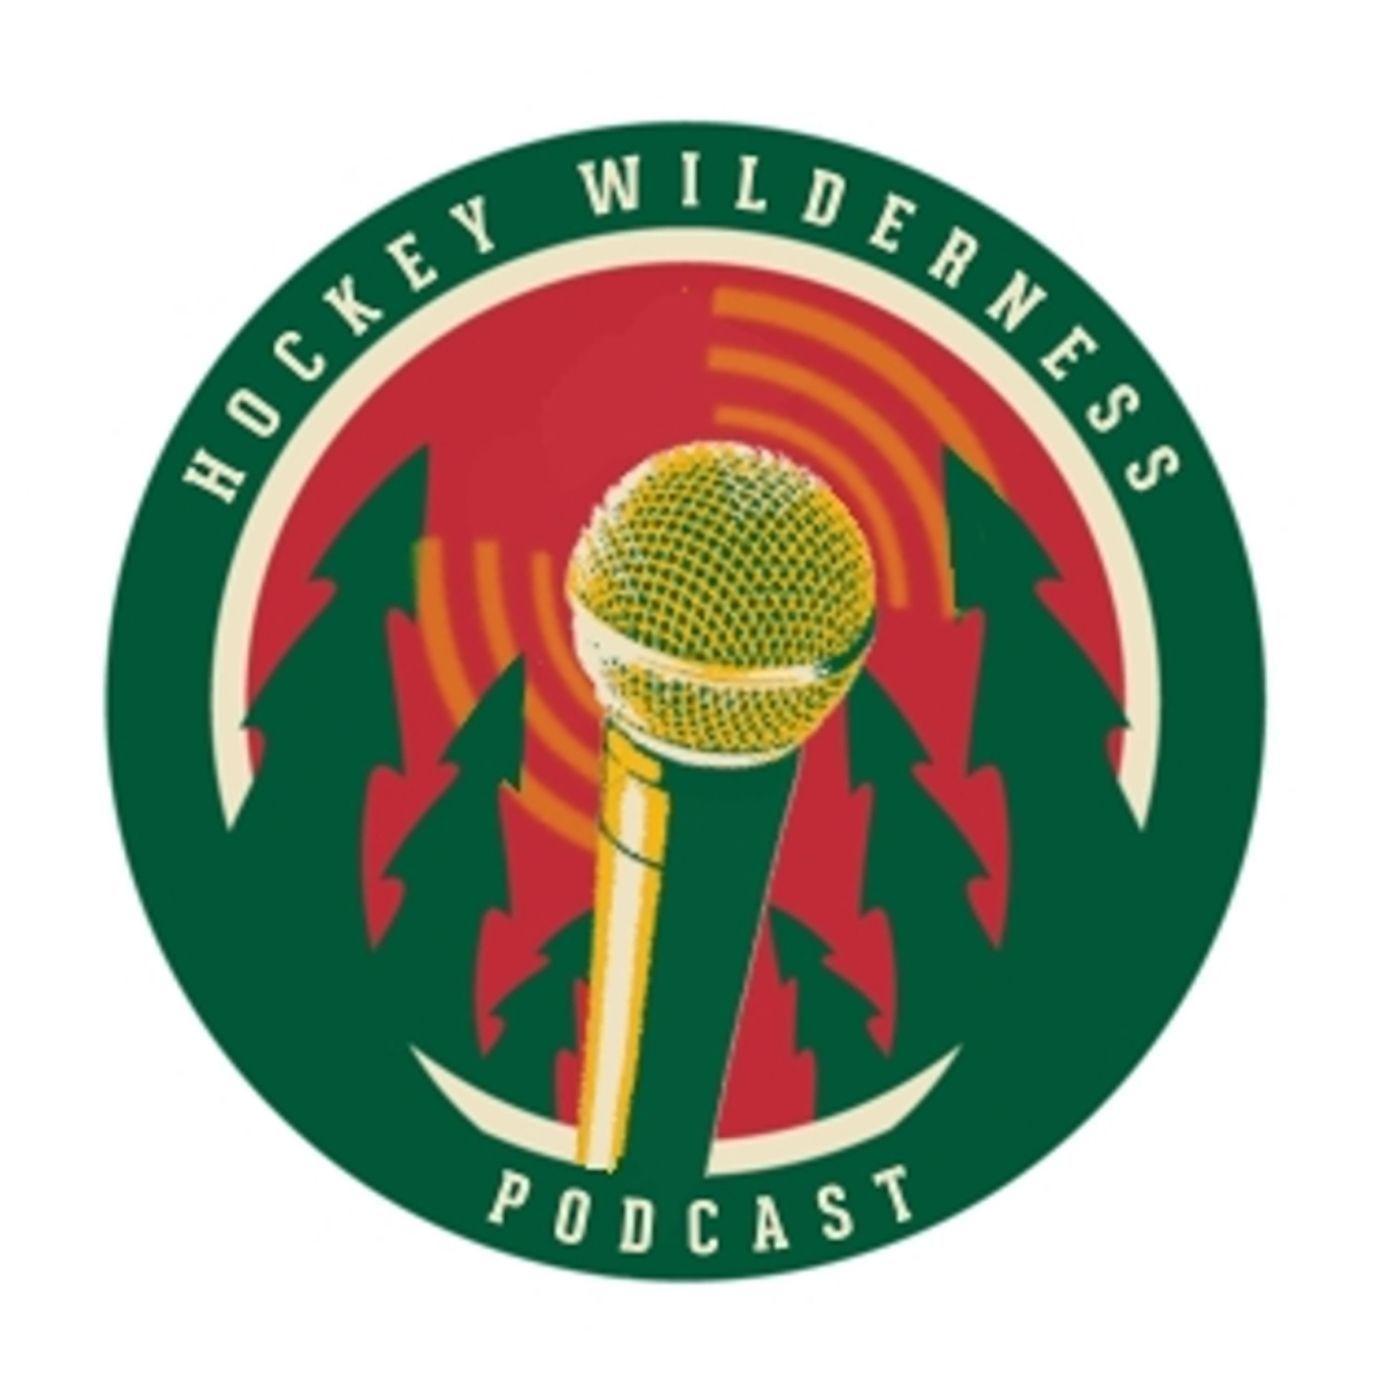 HW Podcast 070: 2016 NHL Draft Preview with Corey Pronman